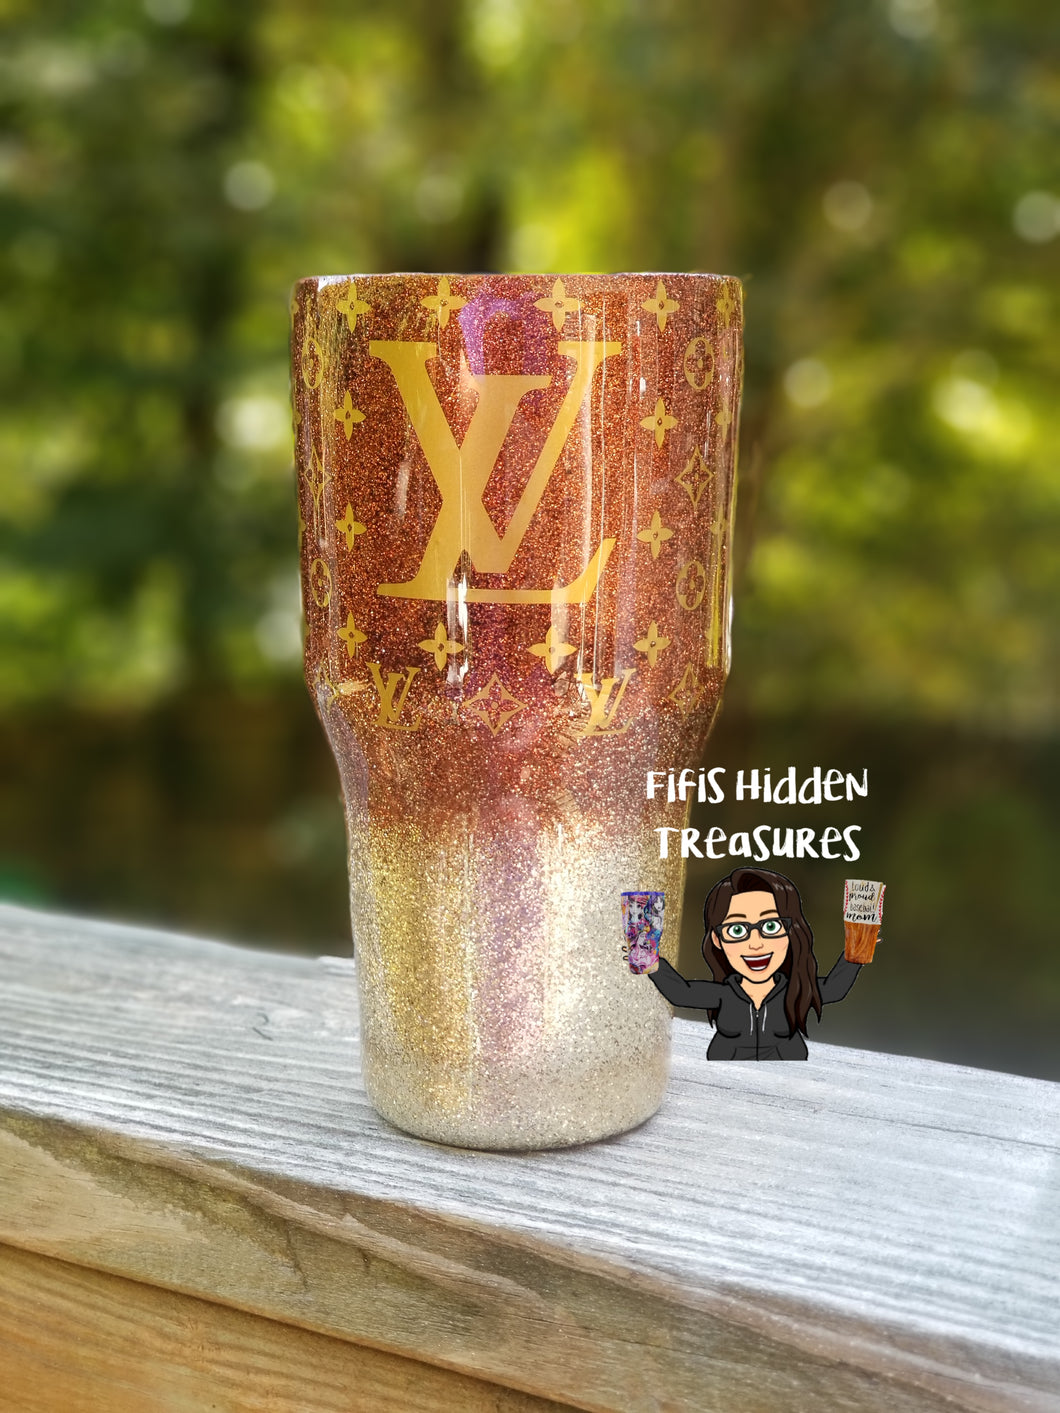 Lv Decals For Cups